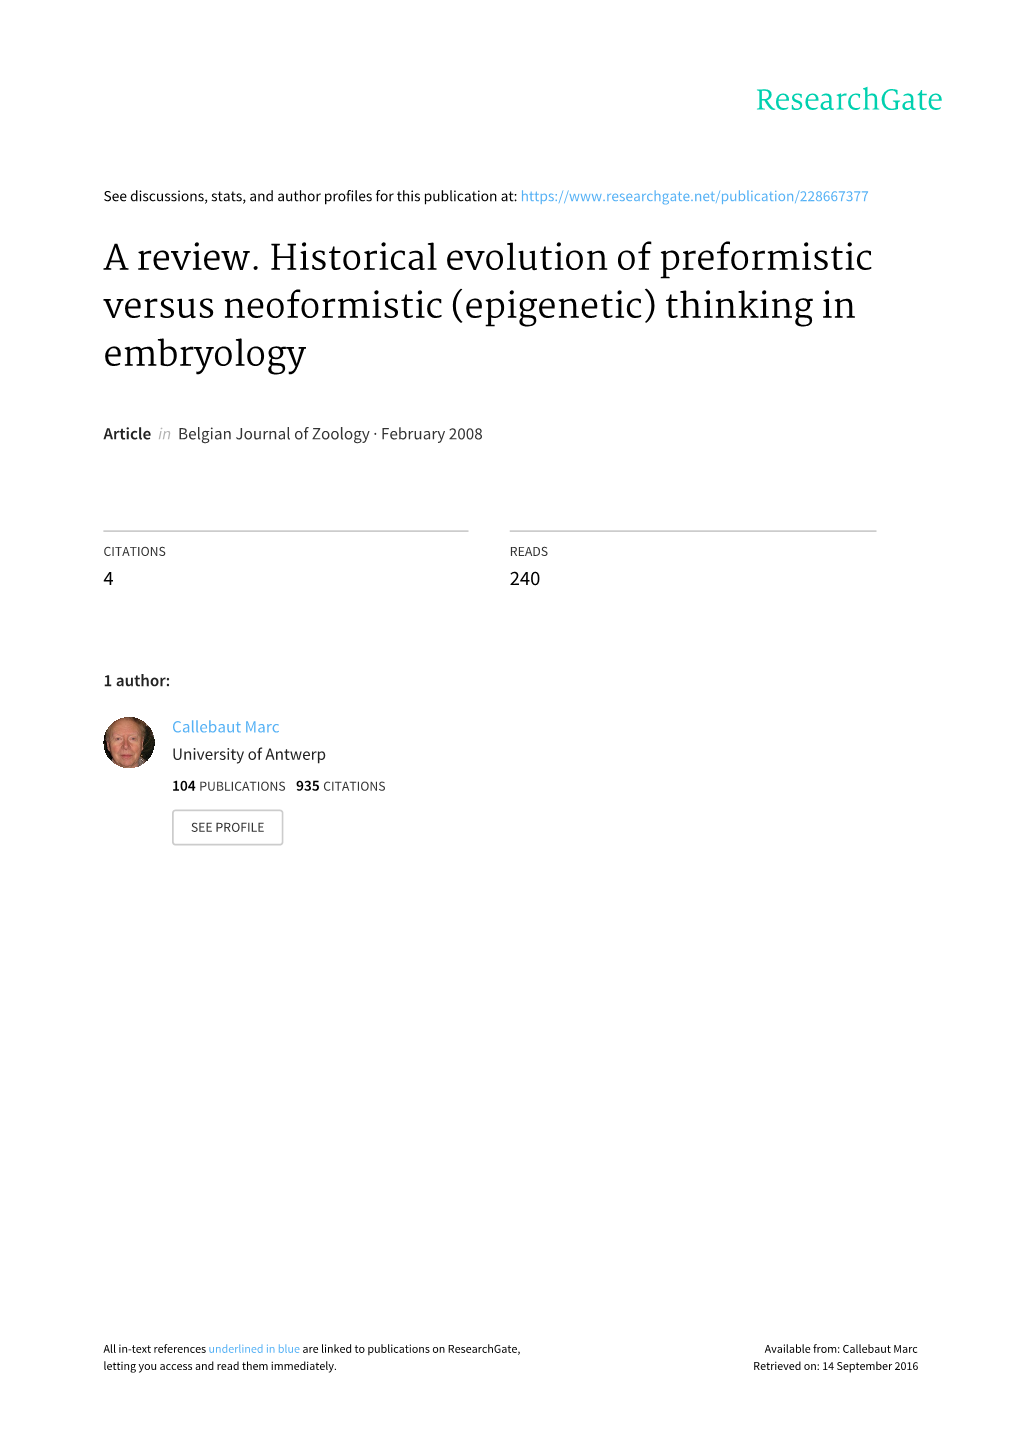 A Review. Historical Evolution of Preformistic Versus Neoformistic (Epigenetic) Thinking in Embryology